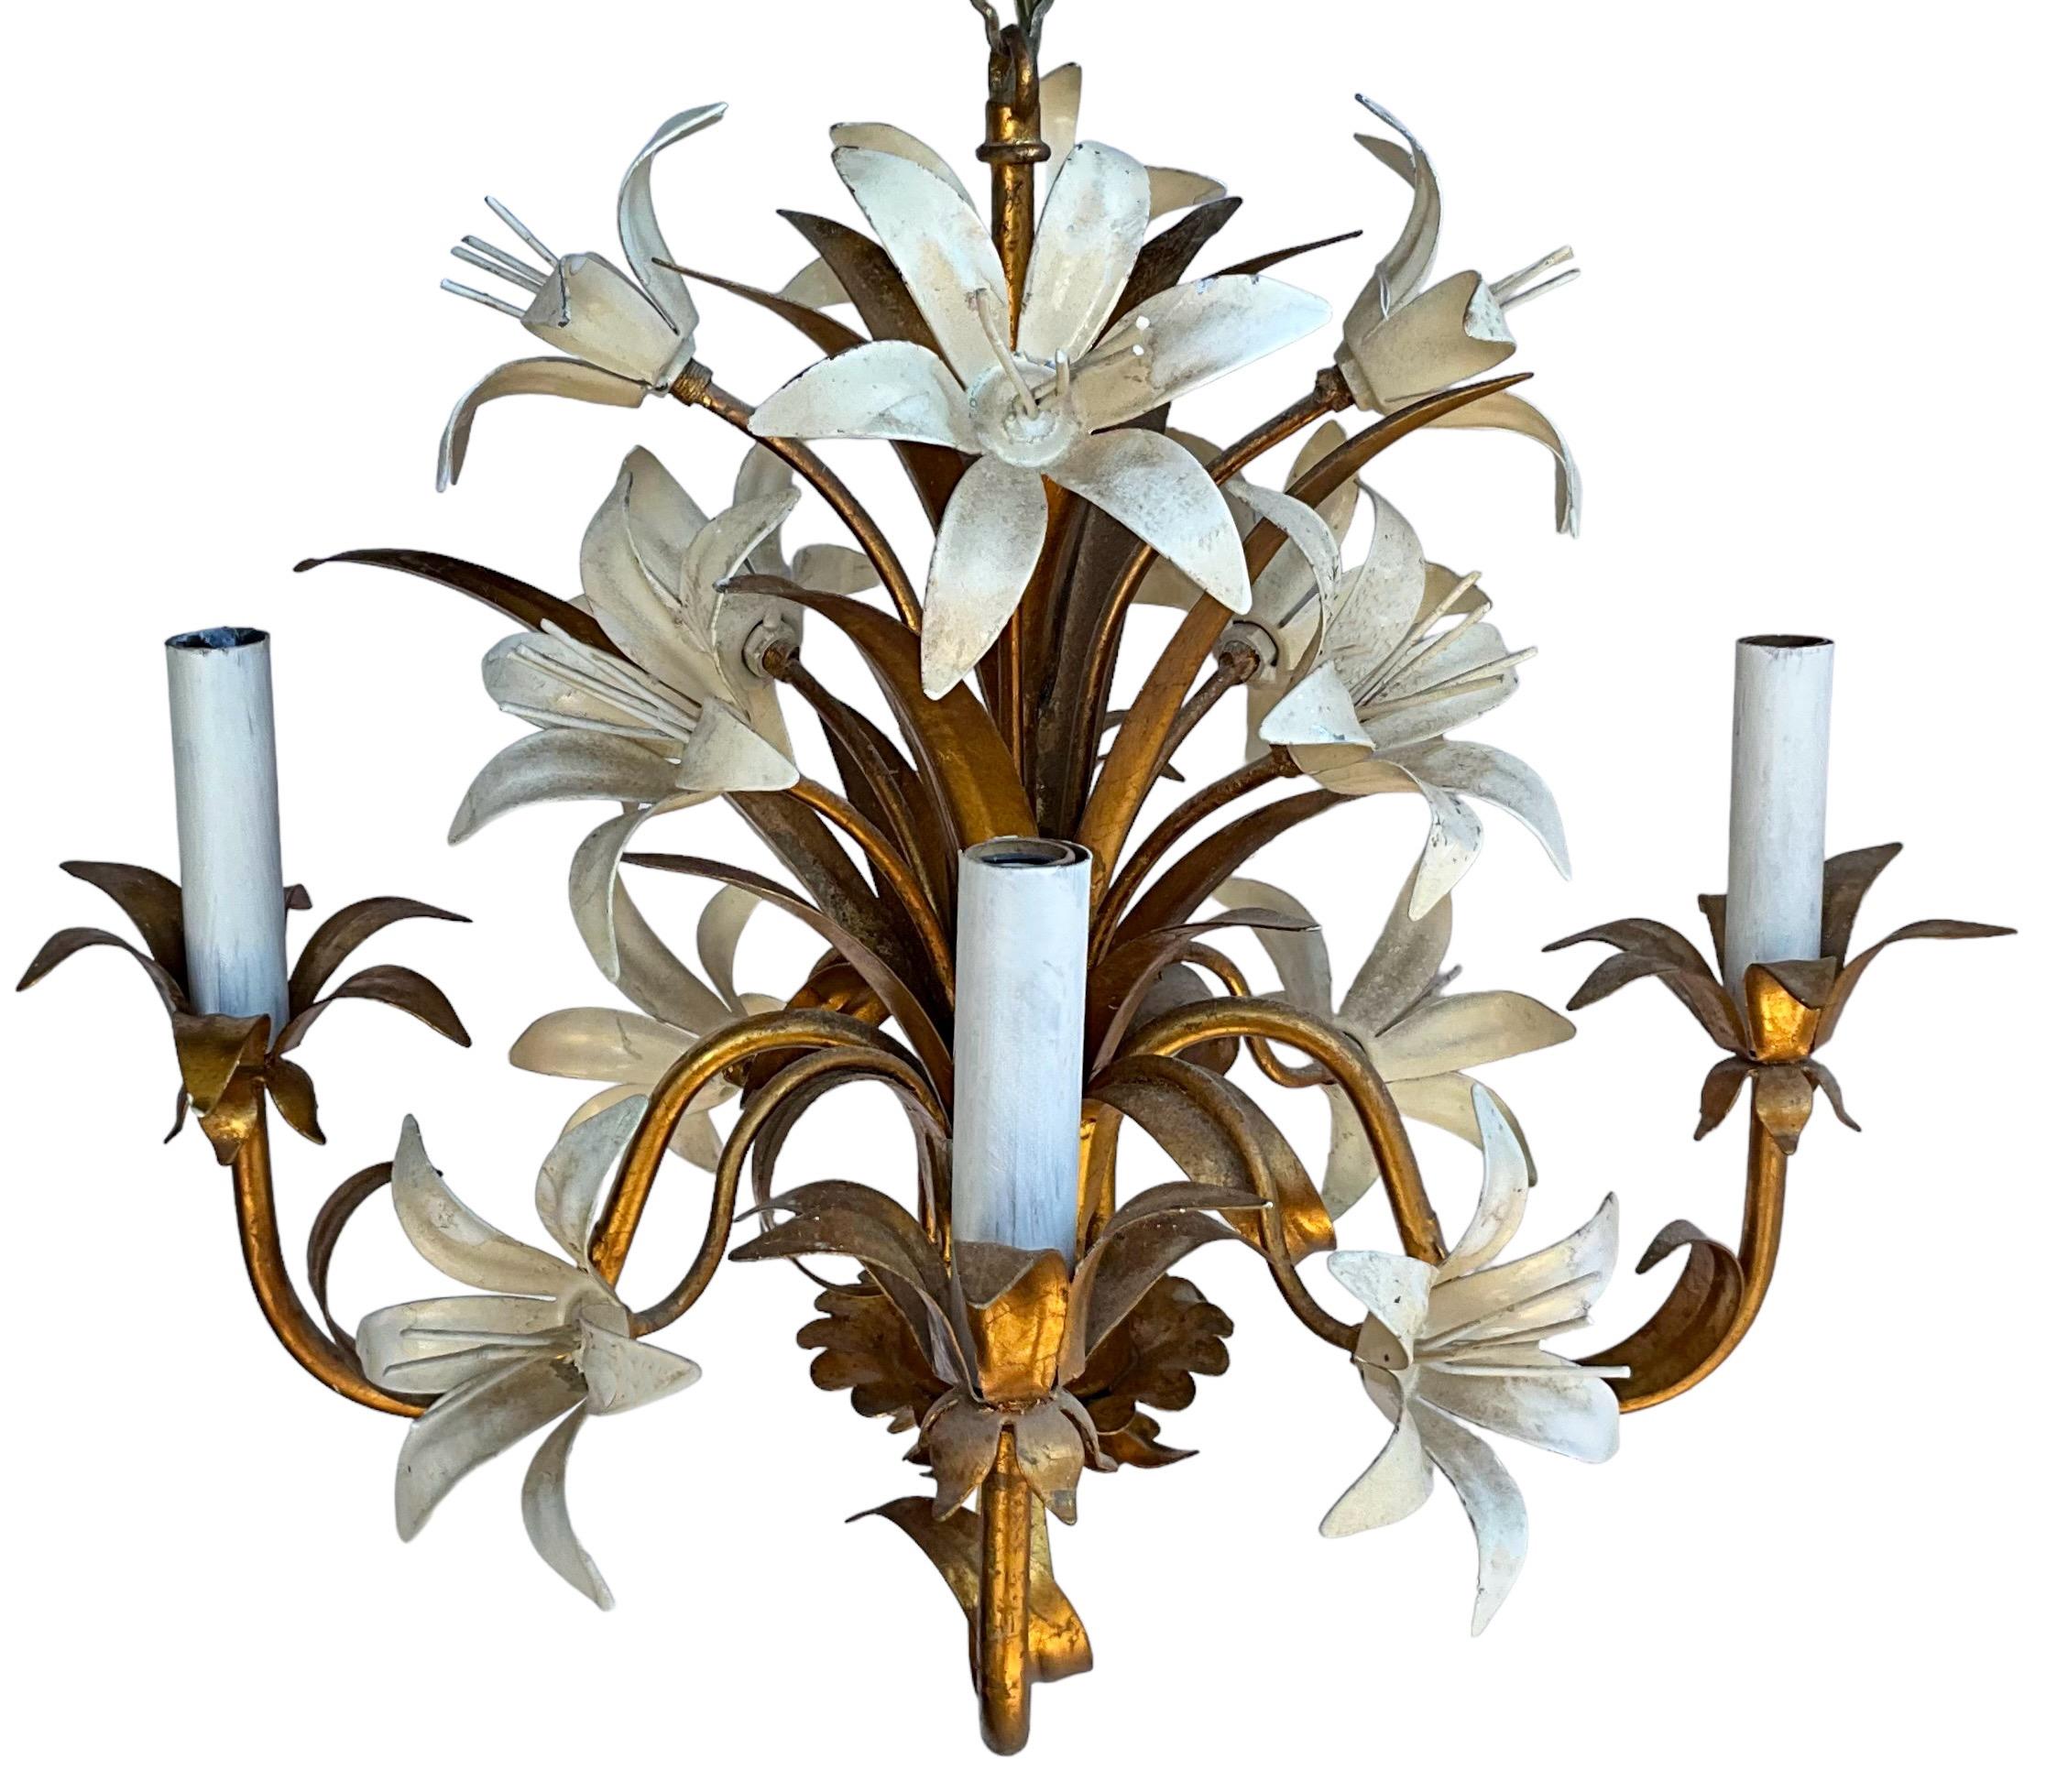 Mid-Century Hollywood Regency Italian Gilt Tole Chandelier With Lilies - 6 Arm For Sale 1